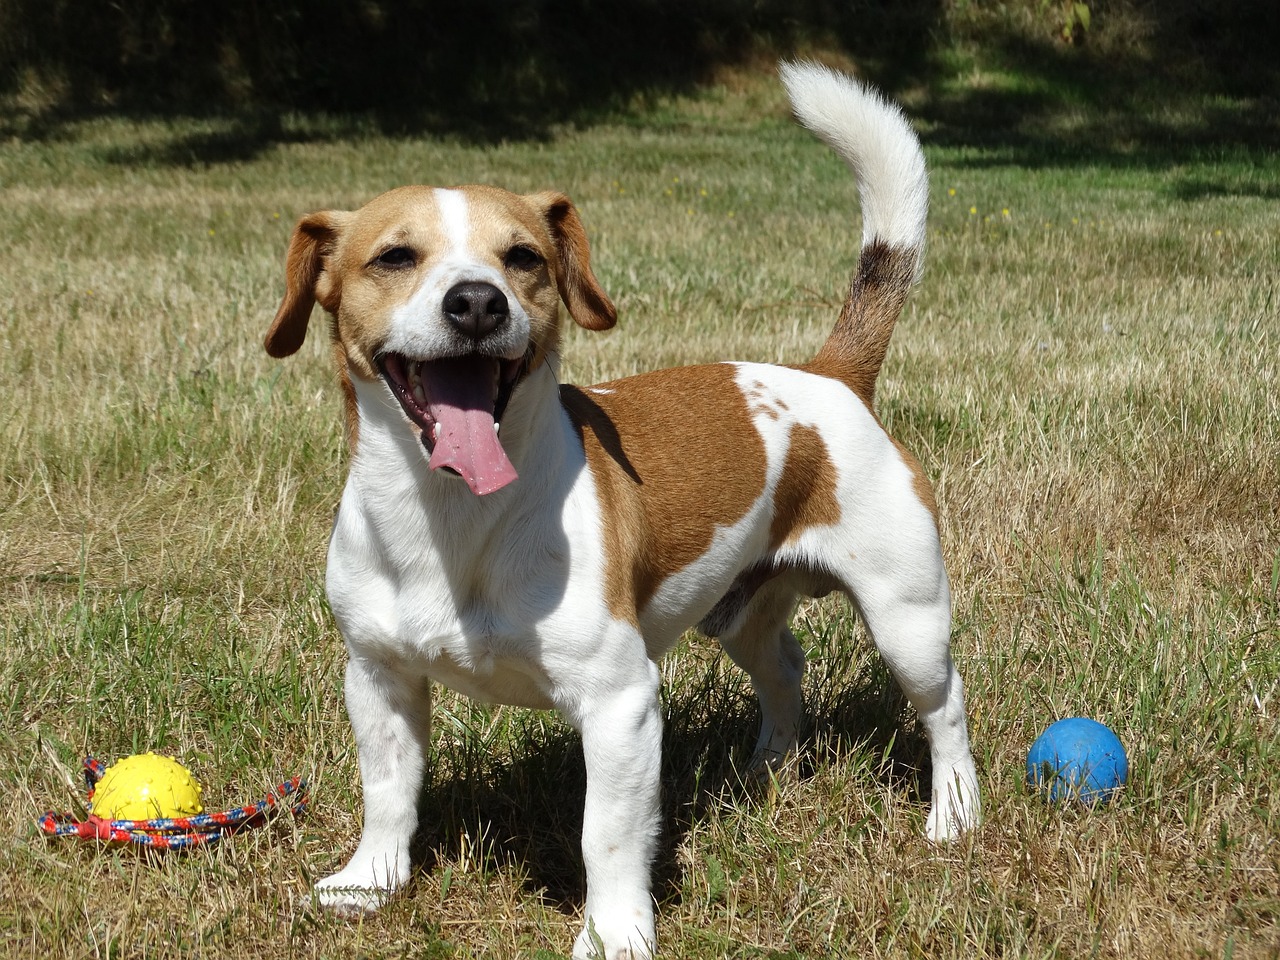 Jack Russell Temperament: What’s a Jack Russell’s Personality Like?